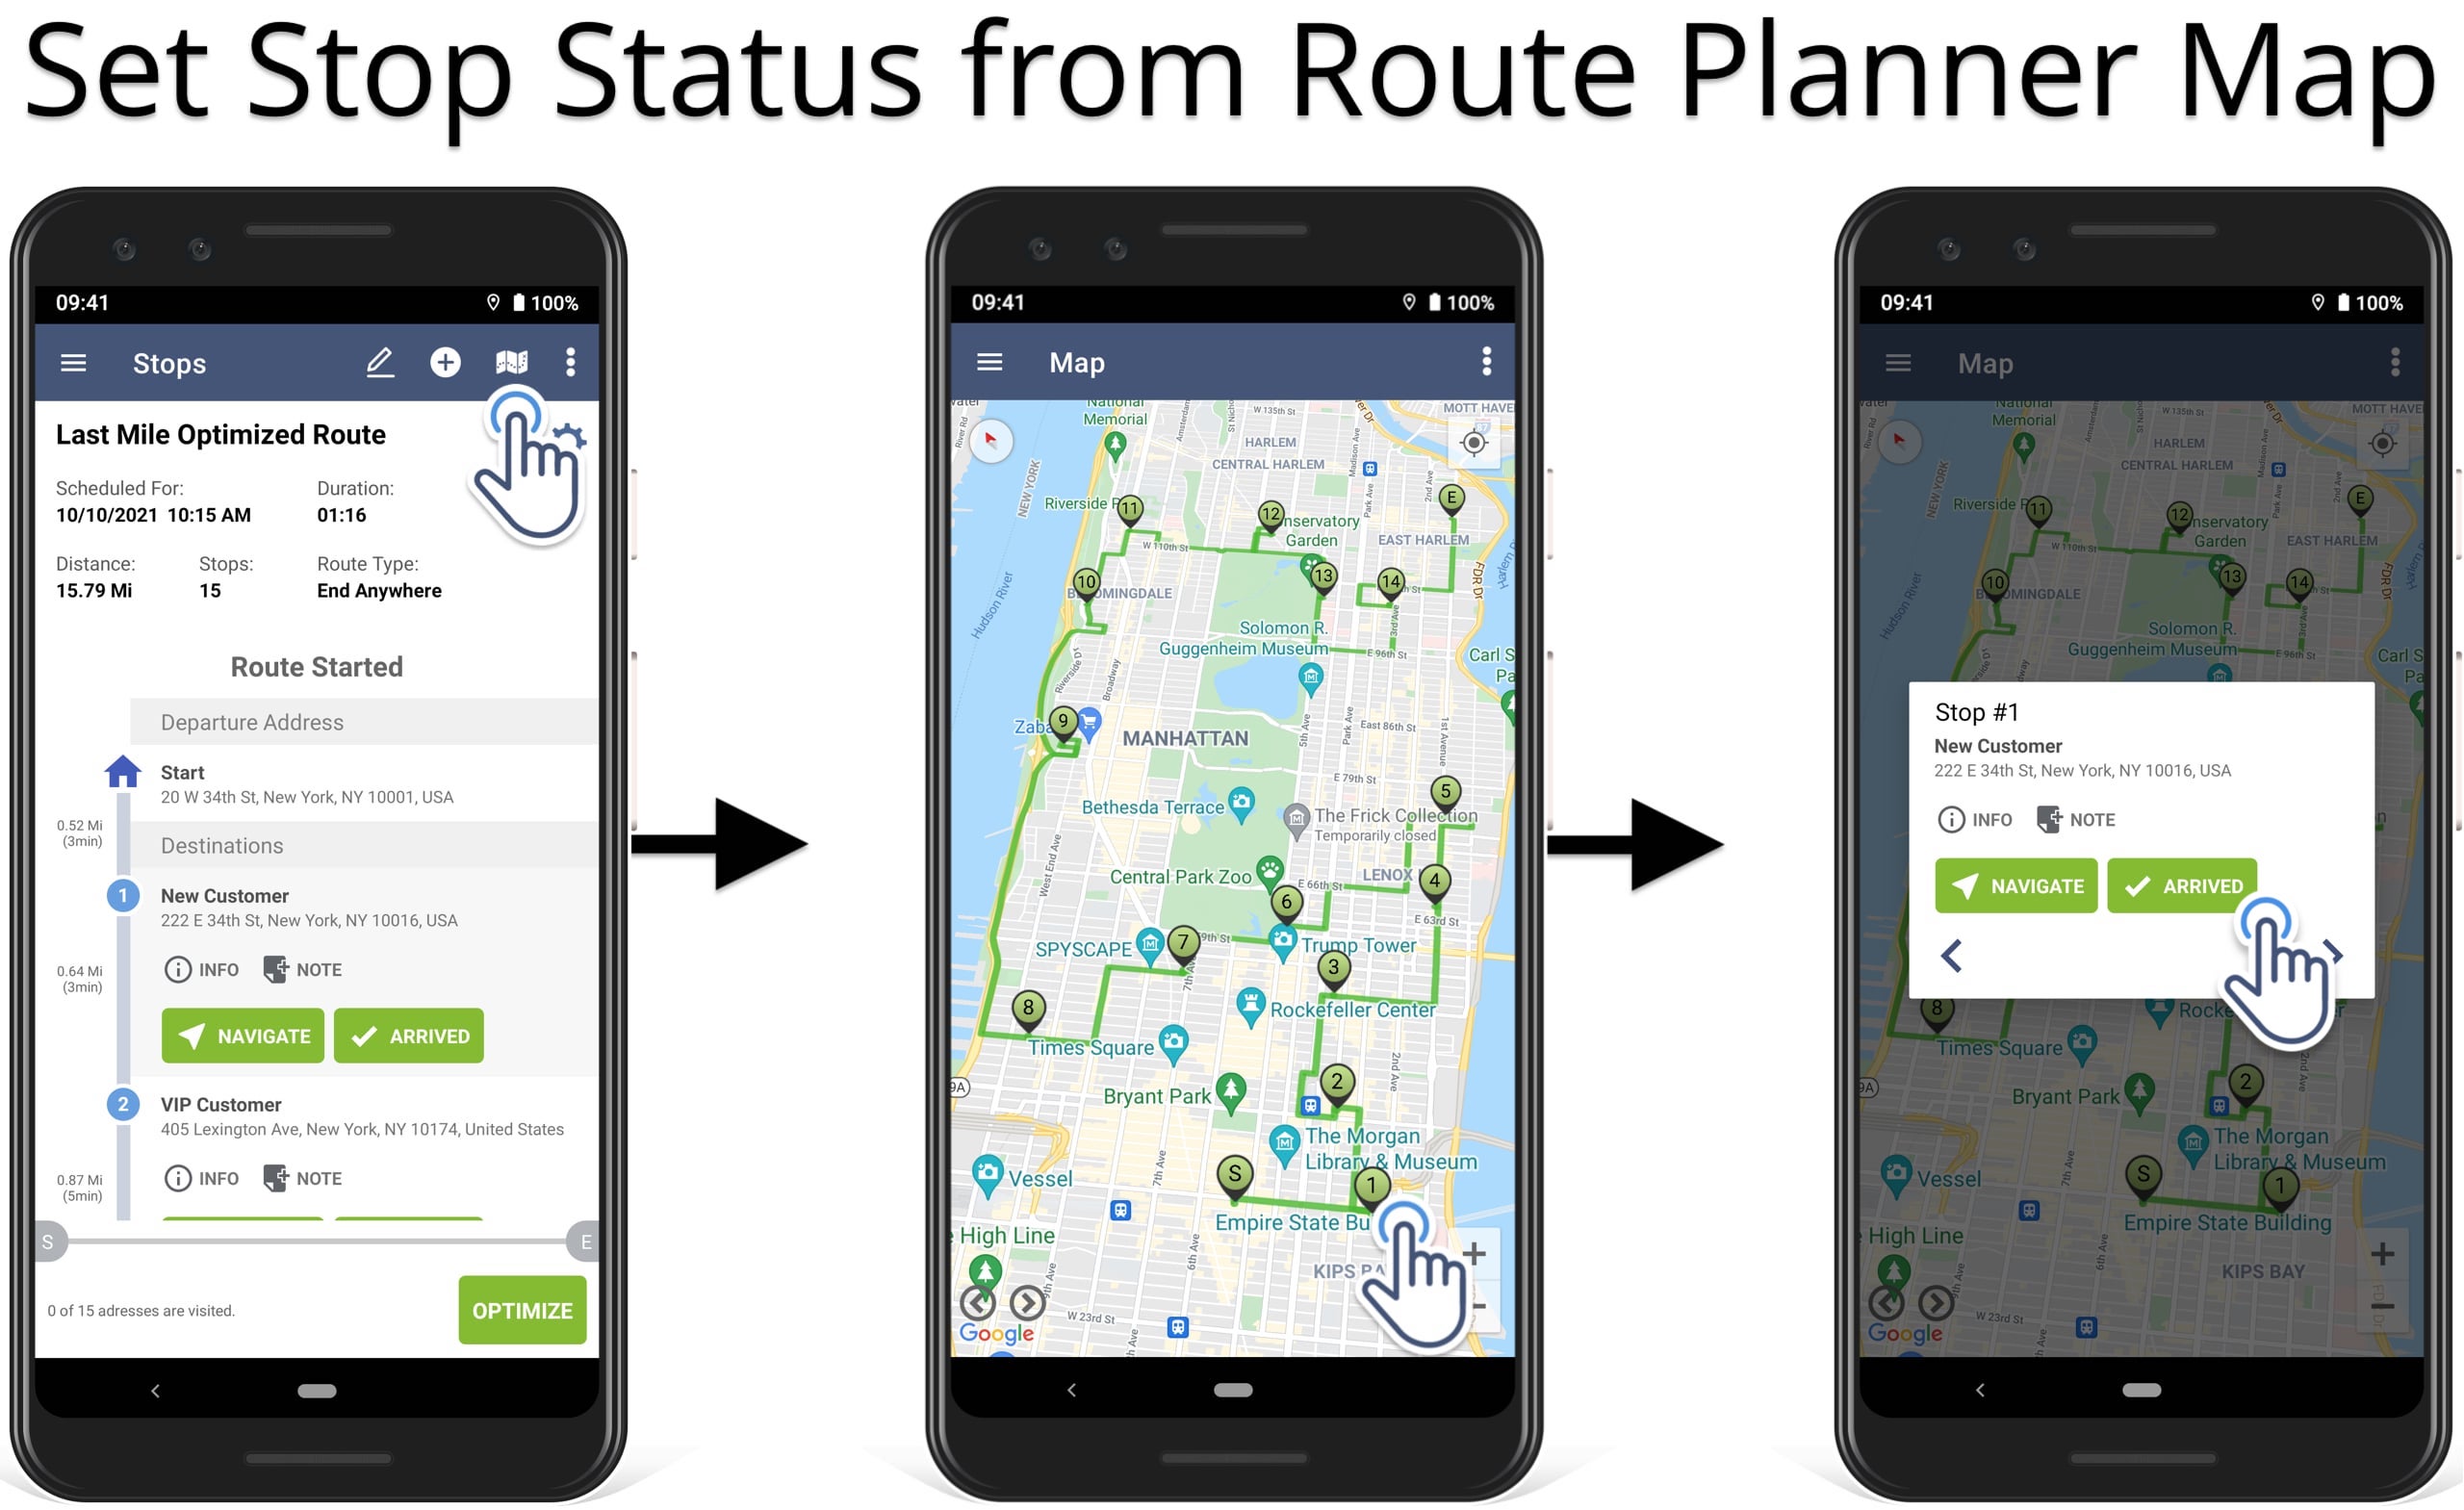 Open planned route on route planner map to set route status for failed and completed orders.